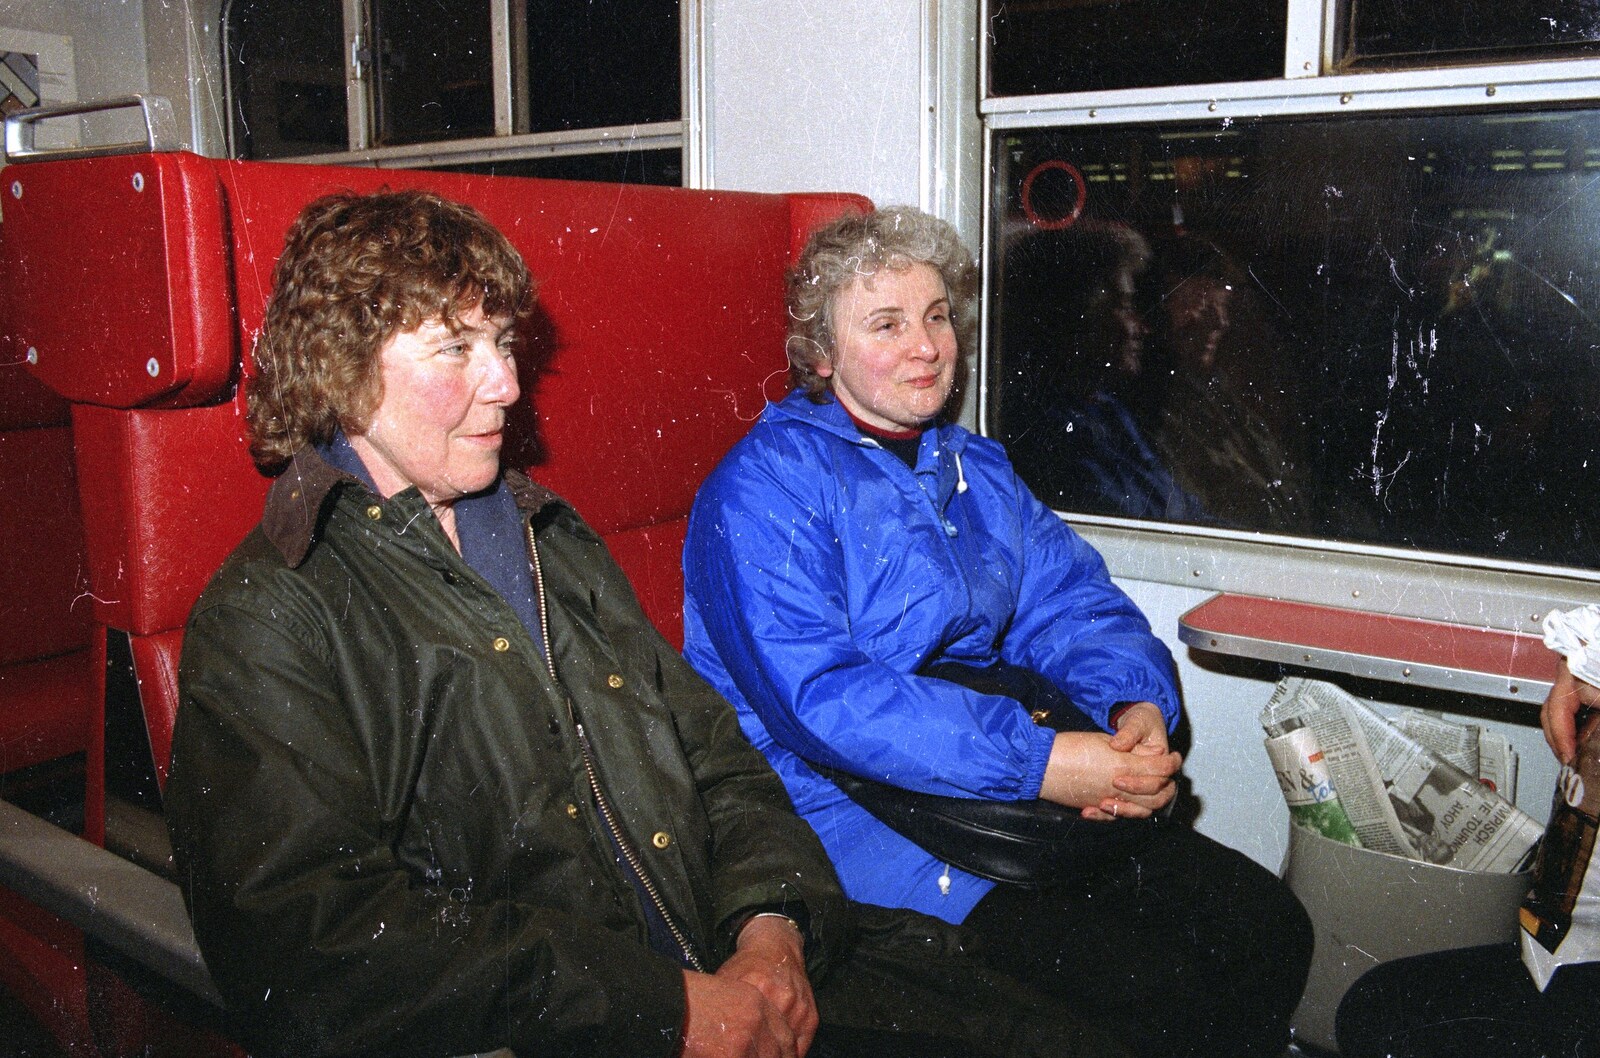 Out and About in Amsterdam, Hoorne, Vollendam and Edam, The Netherlands - 26th March 1992: Brenda and Linda on a train back to Diemen from Amsterdam